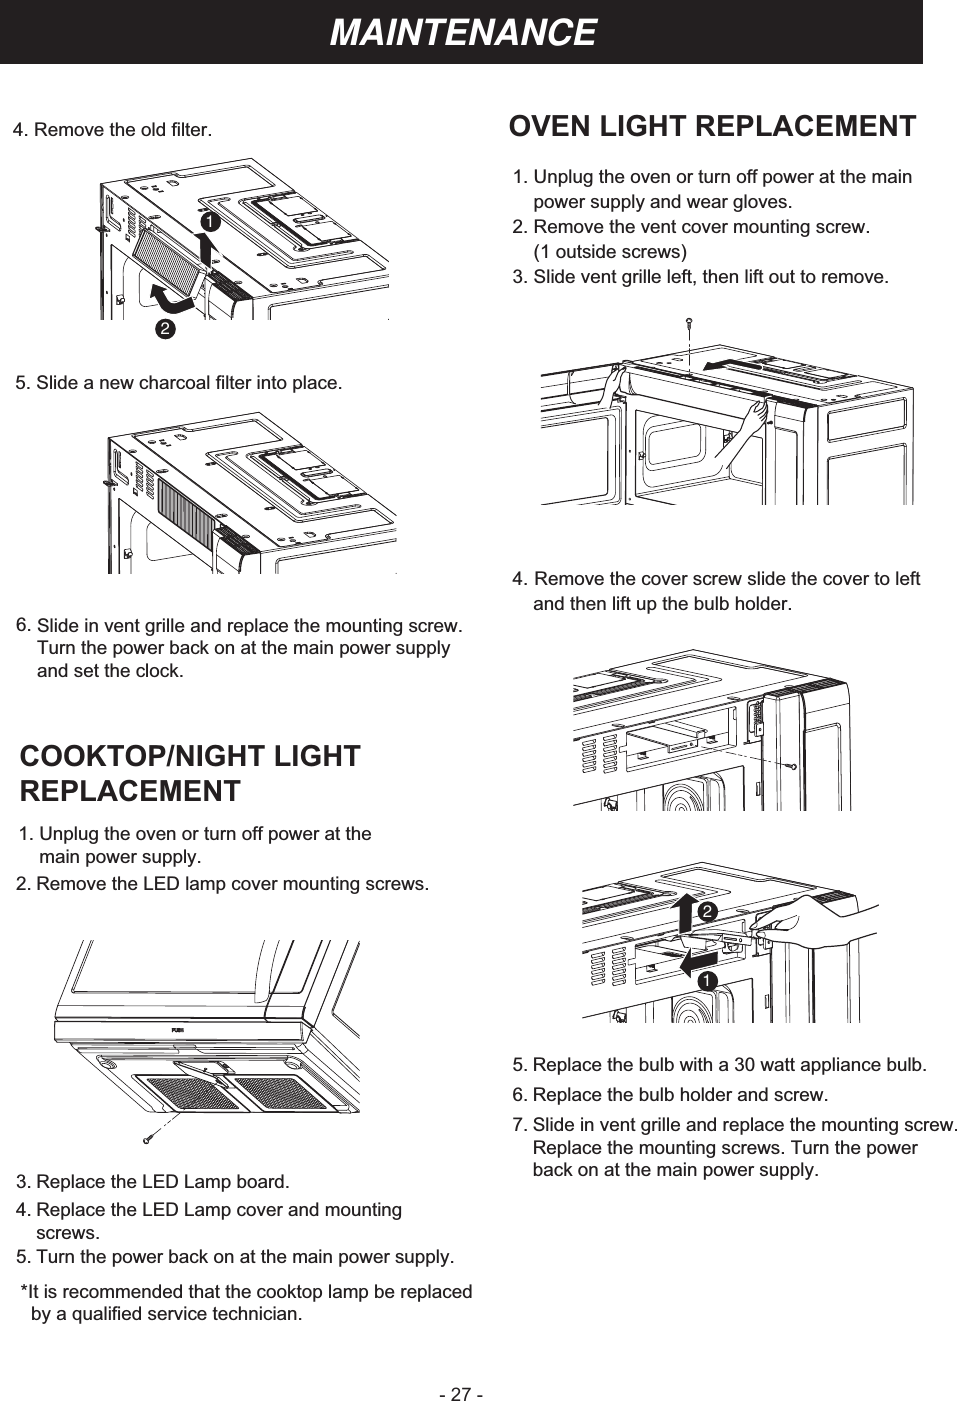 - 27 -MAINTENANCEOVEN LIGHT REPLACEMENT1. Unplug the oven or turn off power at the main    power supply and wear gloves.2. Remove the vent cover mounting screw.    (1 outside screws)3. Slide vent grille left, then lift out to remove.4. Remove the cover screw slide the cover to leftand then lift up the bulb holder.5. Replace the bulb with a 30 watt appliance bulb.6. Replace the bulb holder and screw.7. Slide in vent grille and replace the mounting screw. Replace the mounting screws. Turn the power back on at the main power supply.COOKTOP/NIGHT LIGHT REPLACEMENT 3. Replace the LED Lamp board.4. Replace the LED Lamp cover and mounting screws.5. Turn the power back on at the main power supply. *It is recommended that the cooktop lamp be replaced   by a qualified service technician.2. Remove the LED lamp cover mounting screws.1. Unplug the oven or turn off power at themain power supply.6. Slide in vent grille and replace the mounting screw.Turn the power back on at the main power supply and set the clock.5. Slide a new charcoal filter into place.4. Remove the old filter.1212